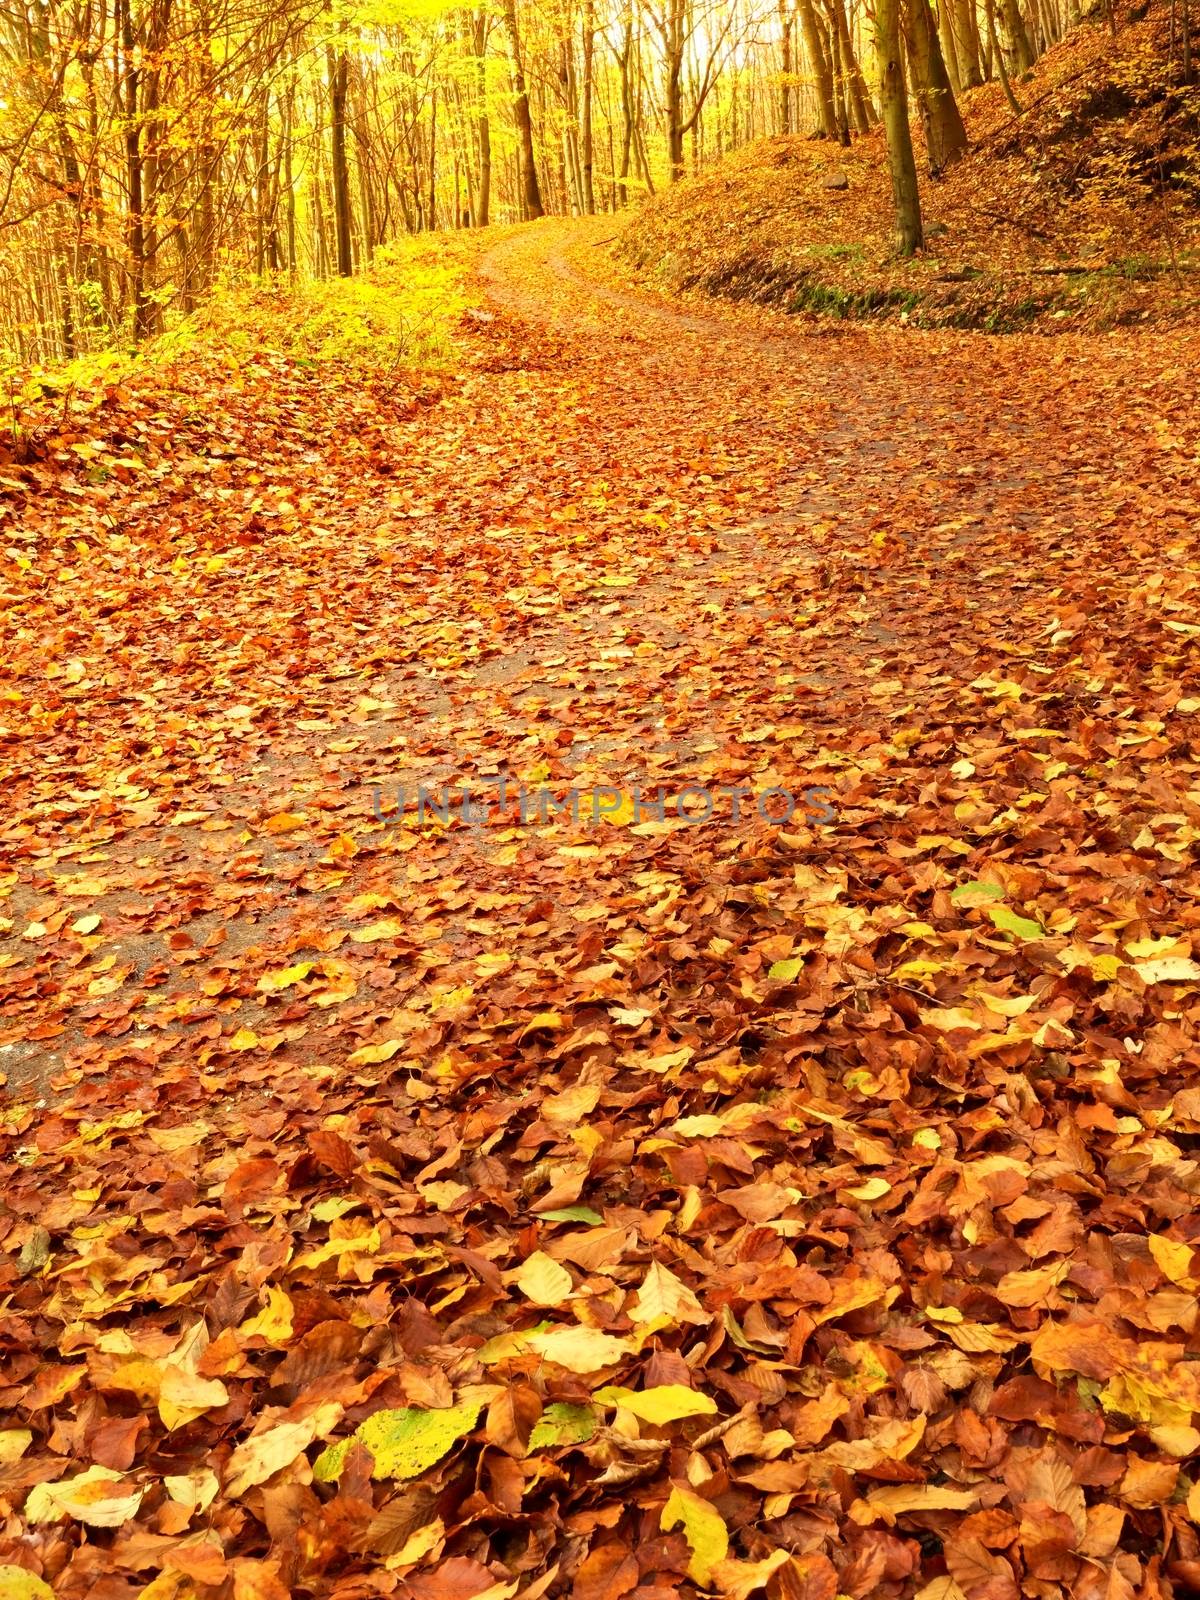 Autum in nature. Colorful autumnal landscape with deciduous forest and many fallen leaves